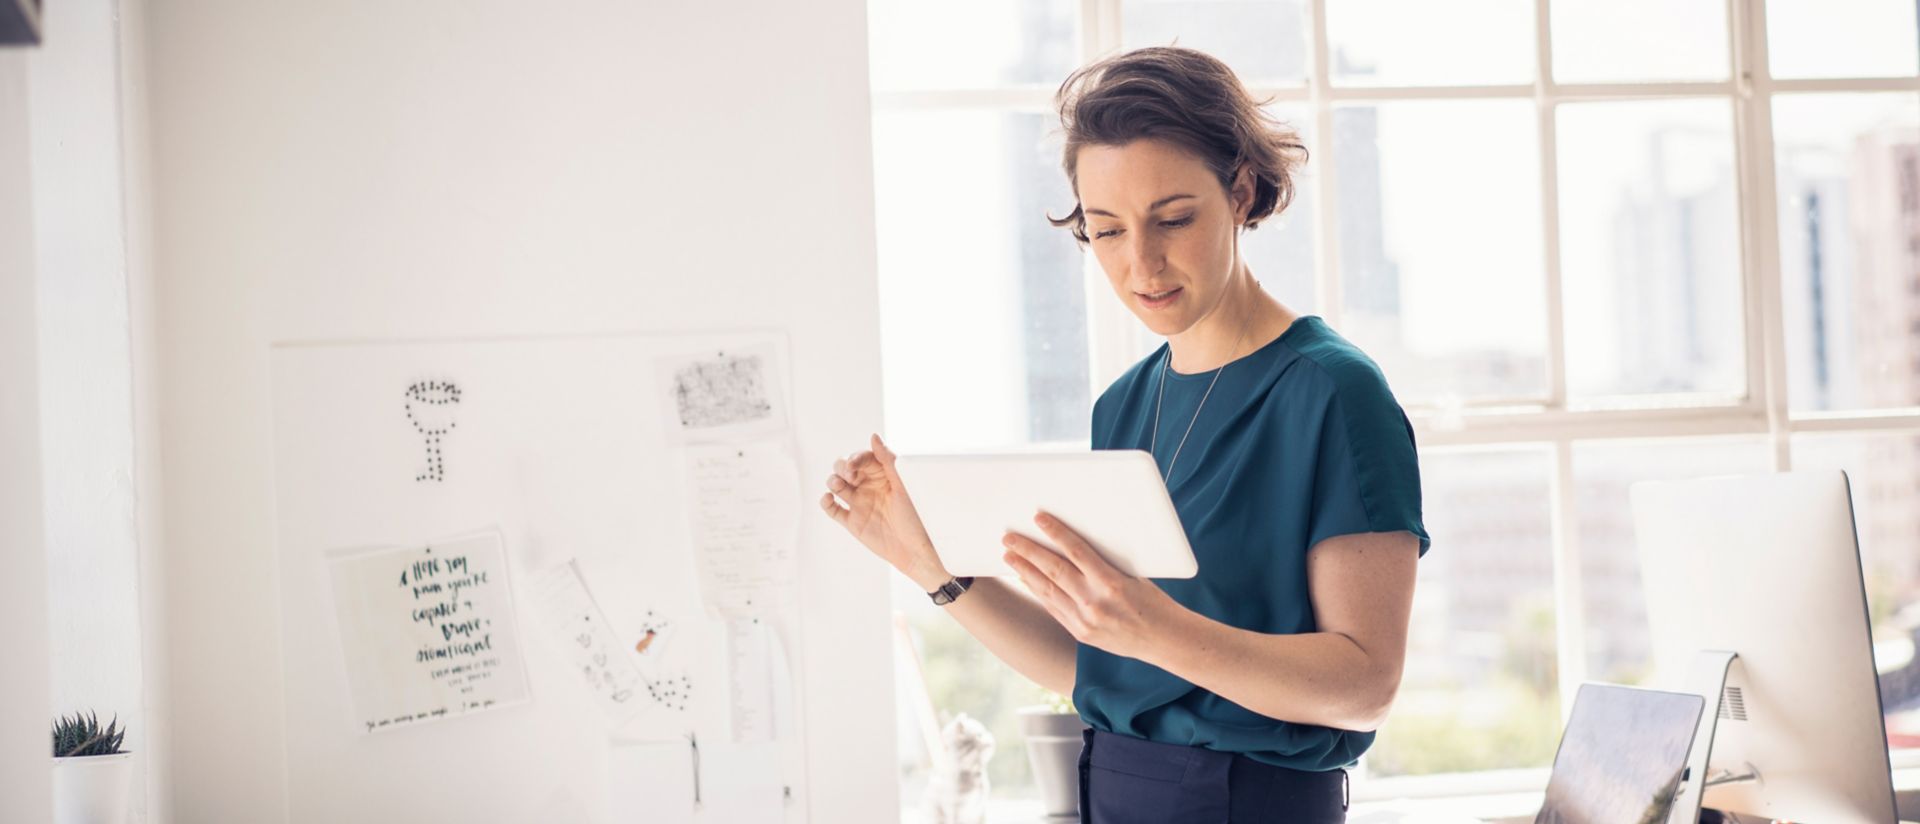 image of woman working in office